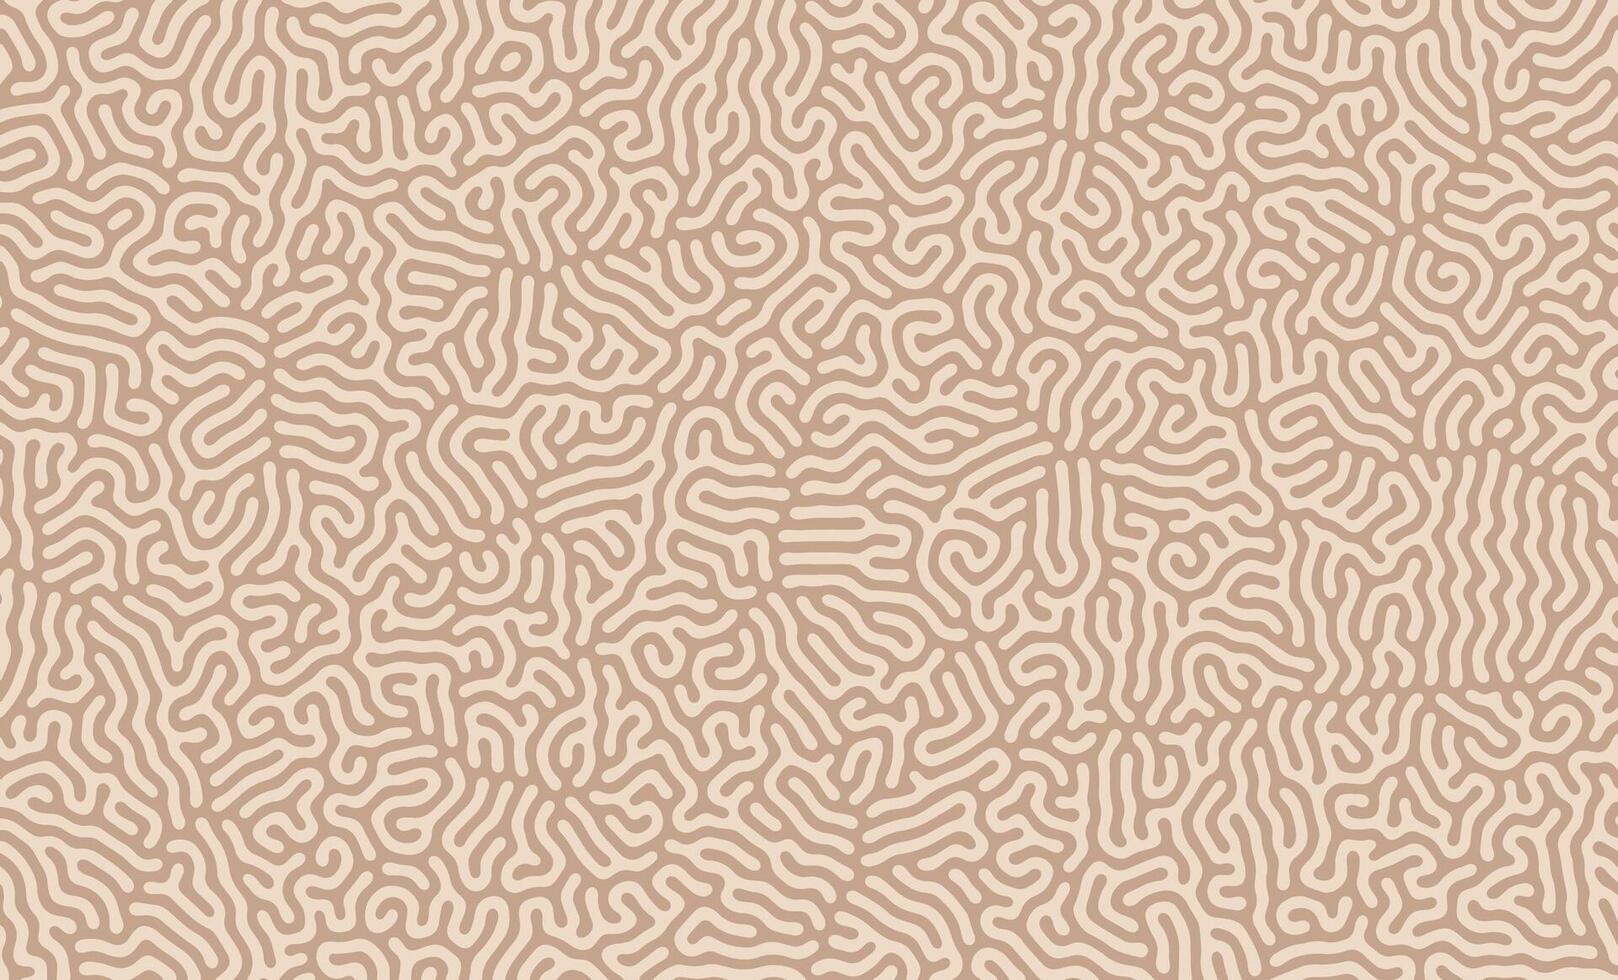 Light Brown turing lines organic shape patterns background design with elegant pattern vector